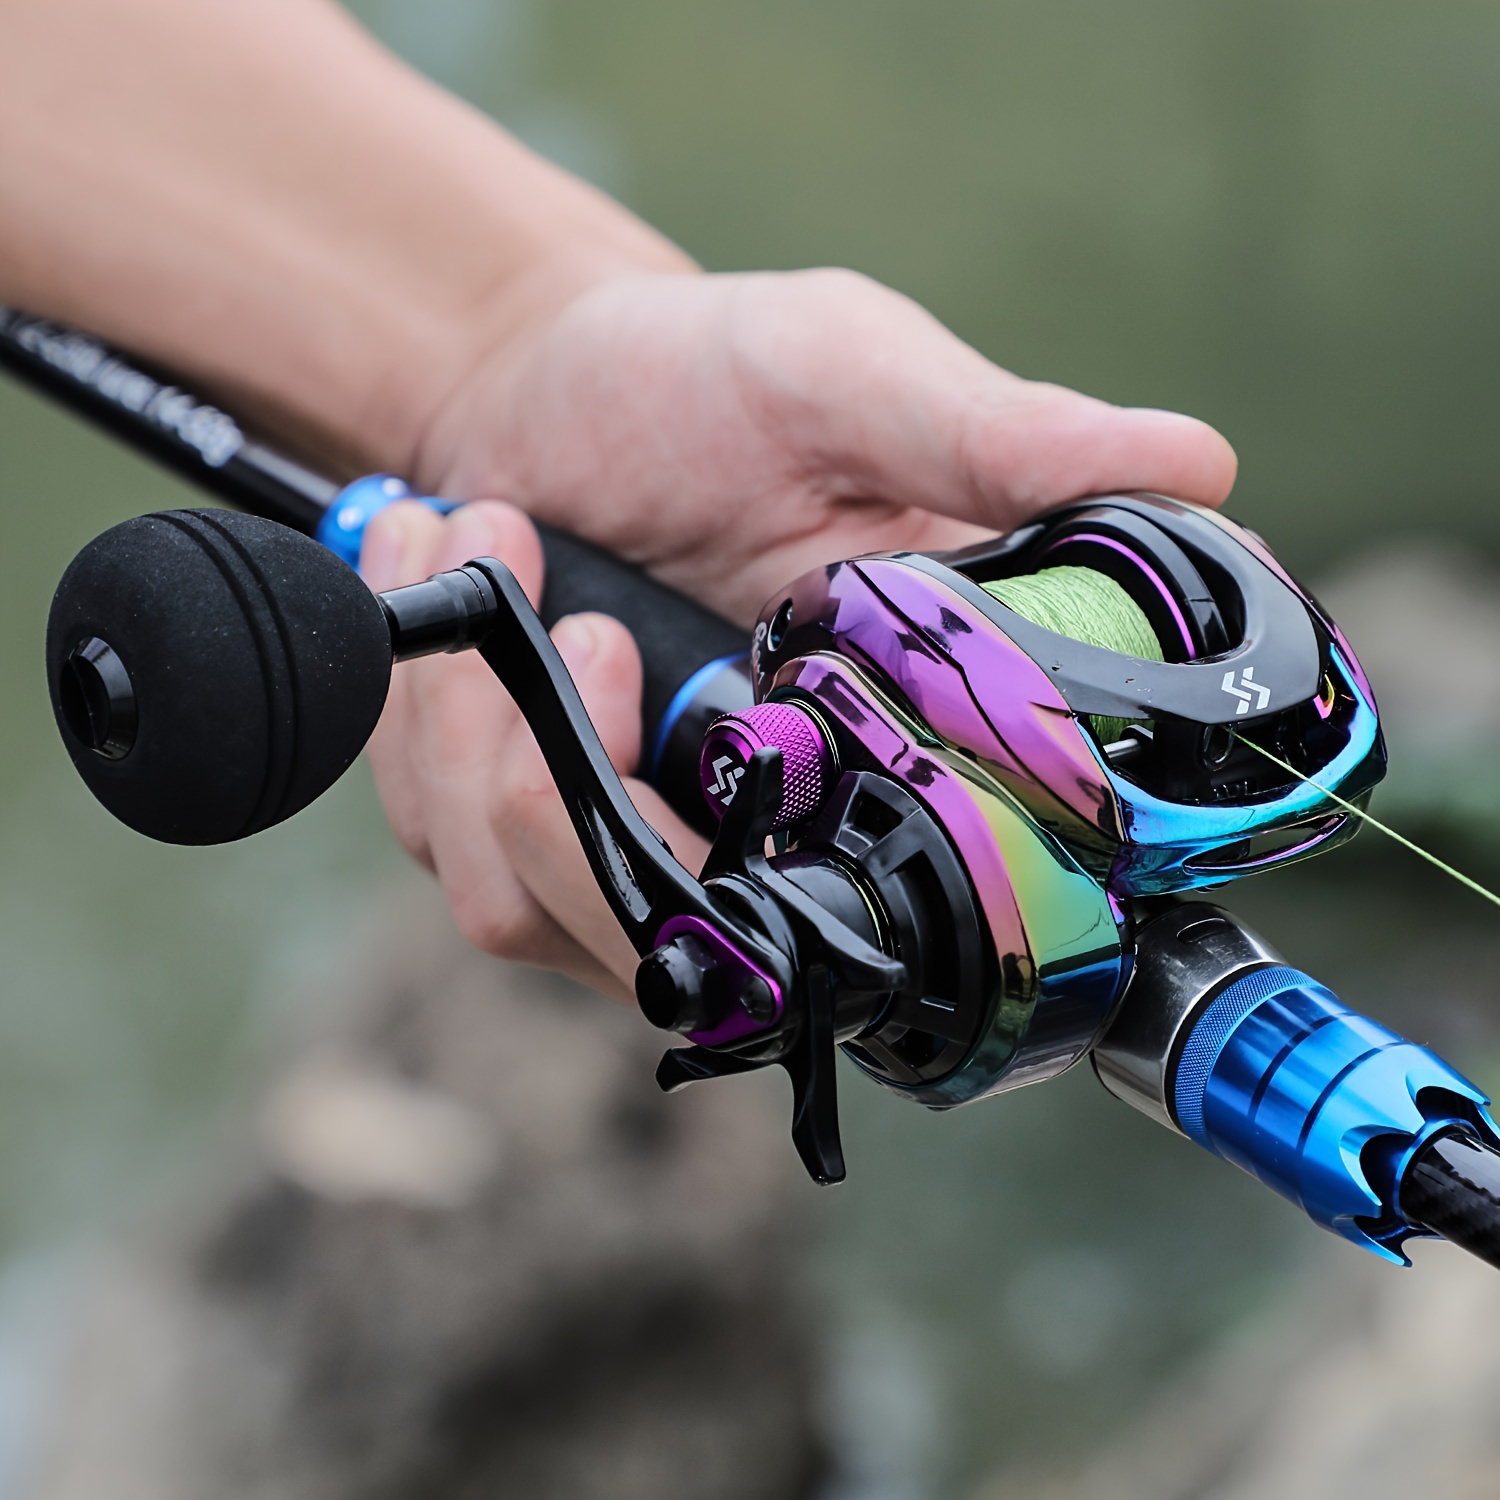 Sougayilang 1pc Baitcasting Fishing Reel, High Speed Baitcaster With 9+1  Ball Bearings, Gear Ratio 8.0:1, Magnetic Brake System, Power Handle Casting